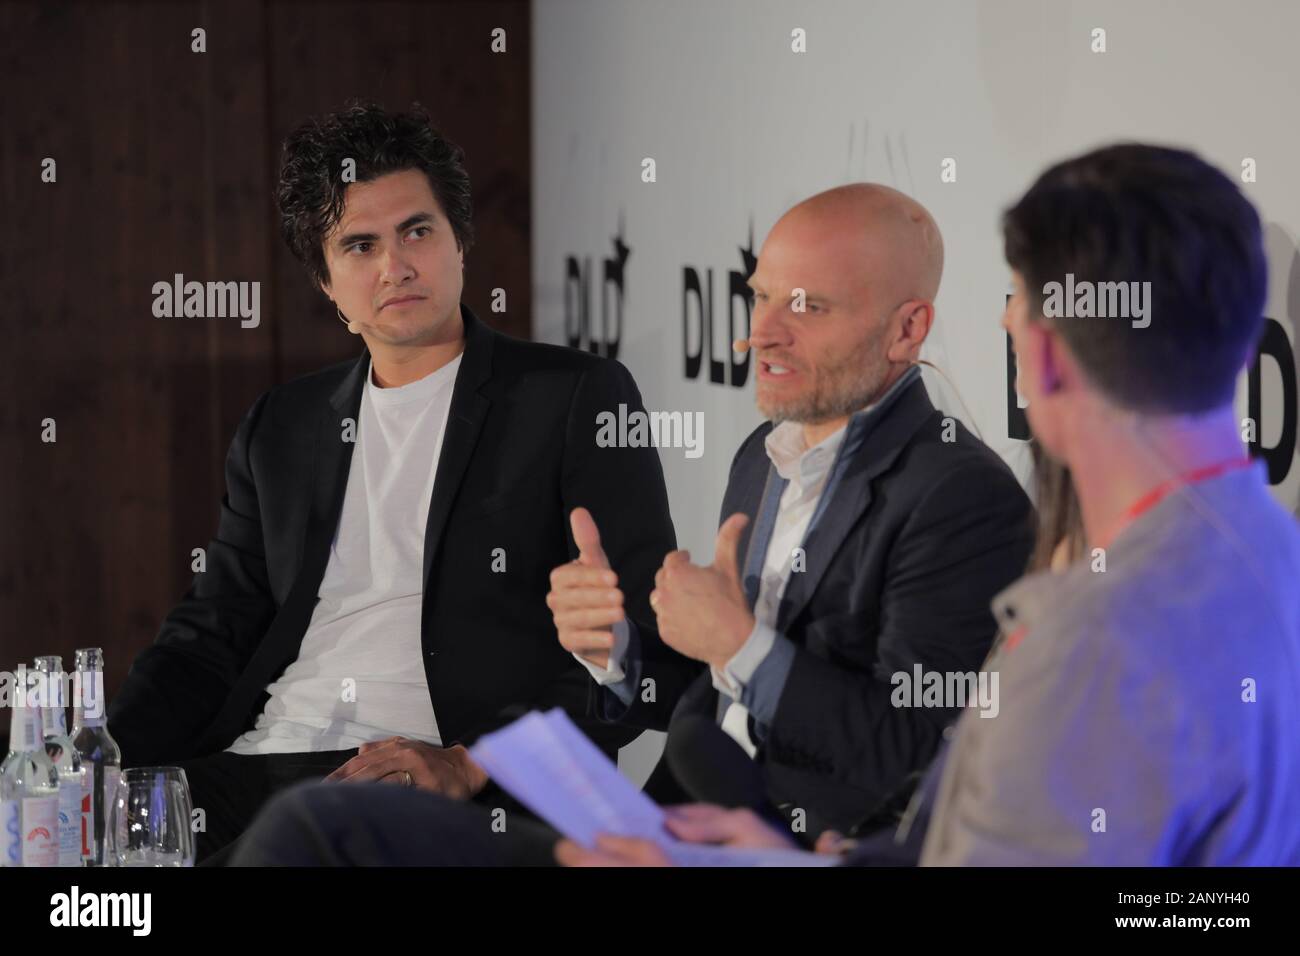 Munich, Bavaria. 19th Jan, 2020. (l-r) Chase Lochmiller (Co-founder & CEO Crusoe Energy Systems), John Pfeffer (Founder Pfeffer Capital LP) and Alexander Liegl (Co-Founder and CEO Layer1) discuss during a panel at DLD Munich Conference 2020, Europe's big innovation conference, Alte Kongresshalle, Munich, January 18-20, 2020 Picture Alliance for DLD/Hubert Burda Media | usage worldwide Credit: dpa/Alamy Live News Stock Photo